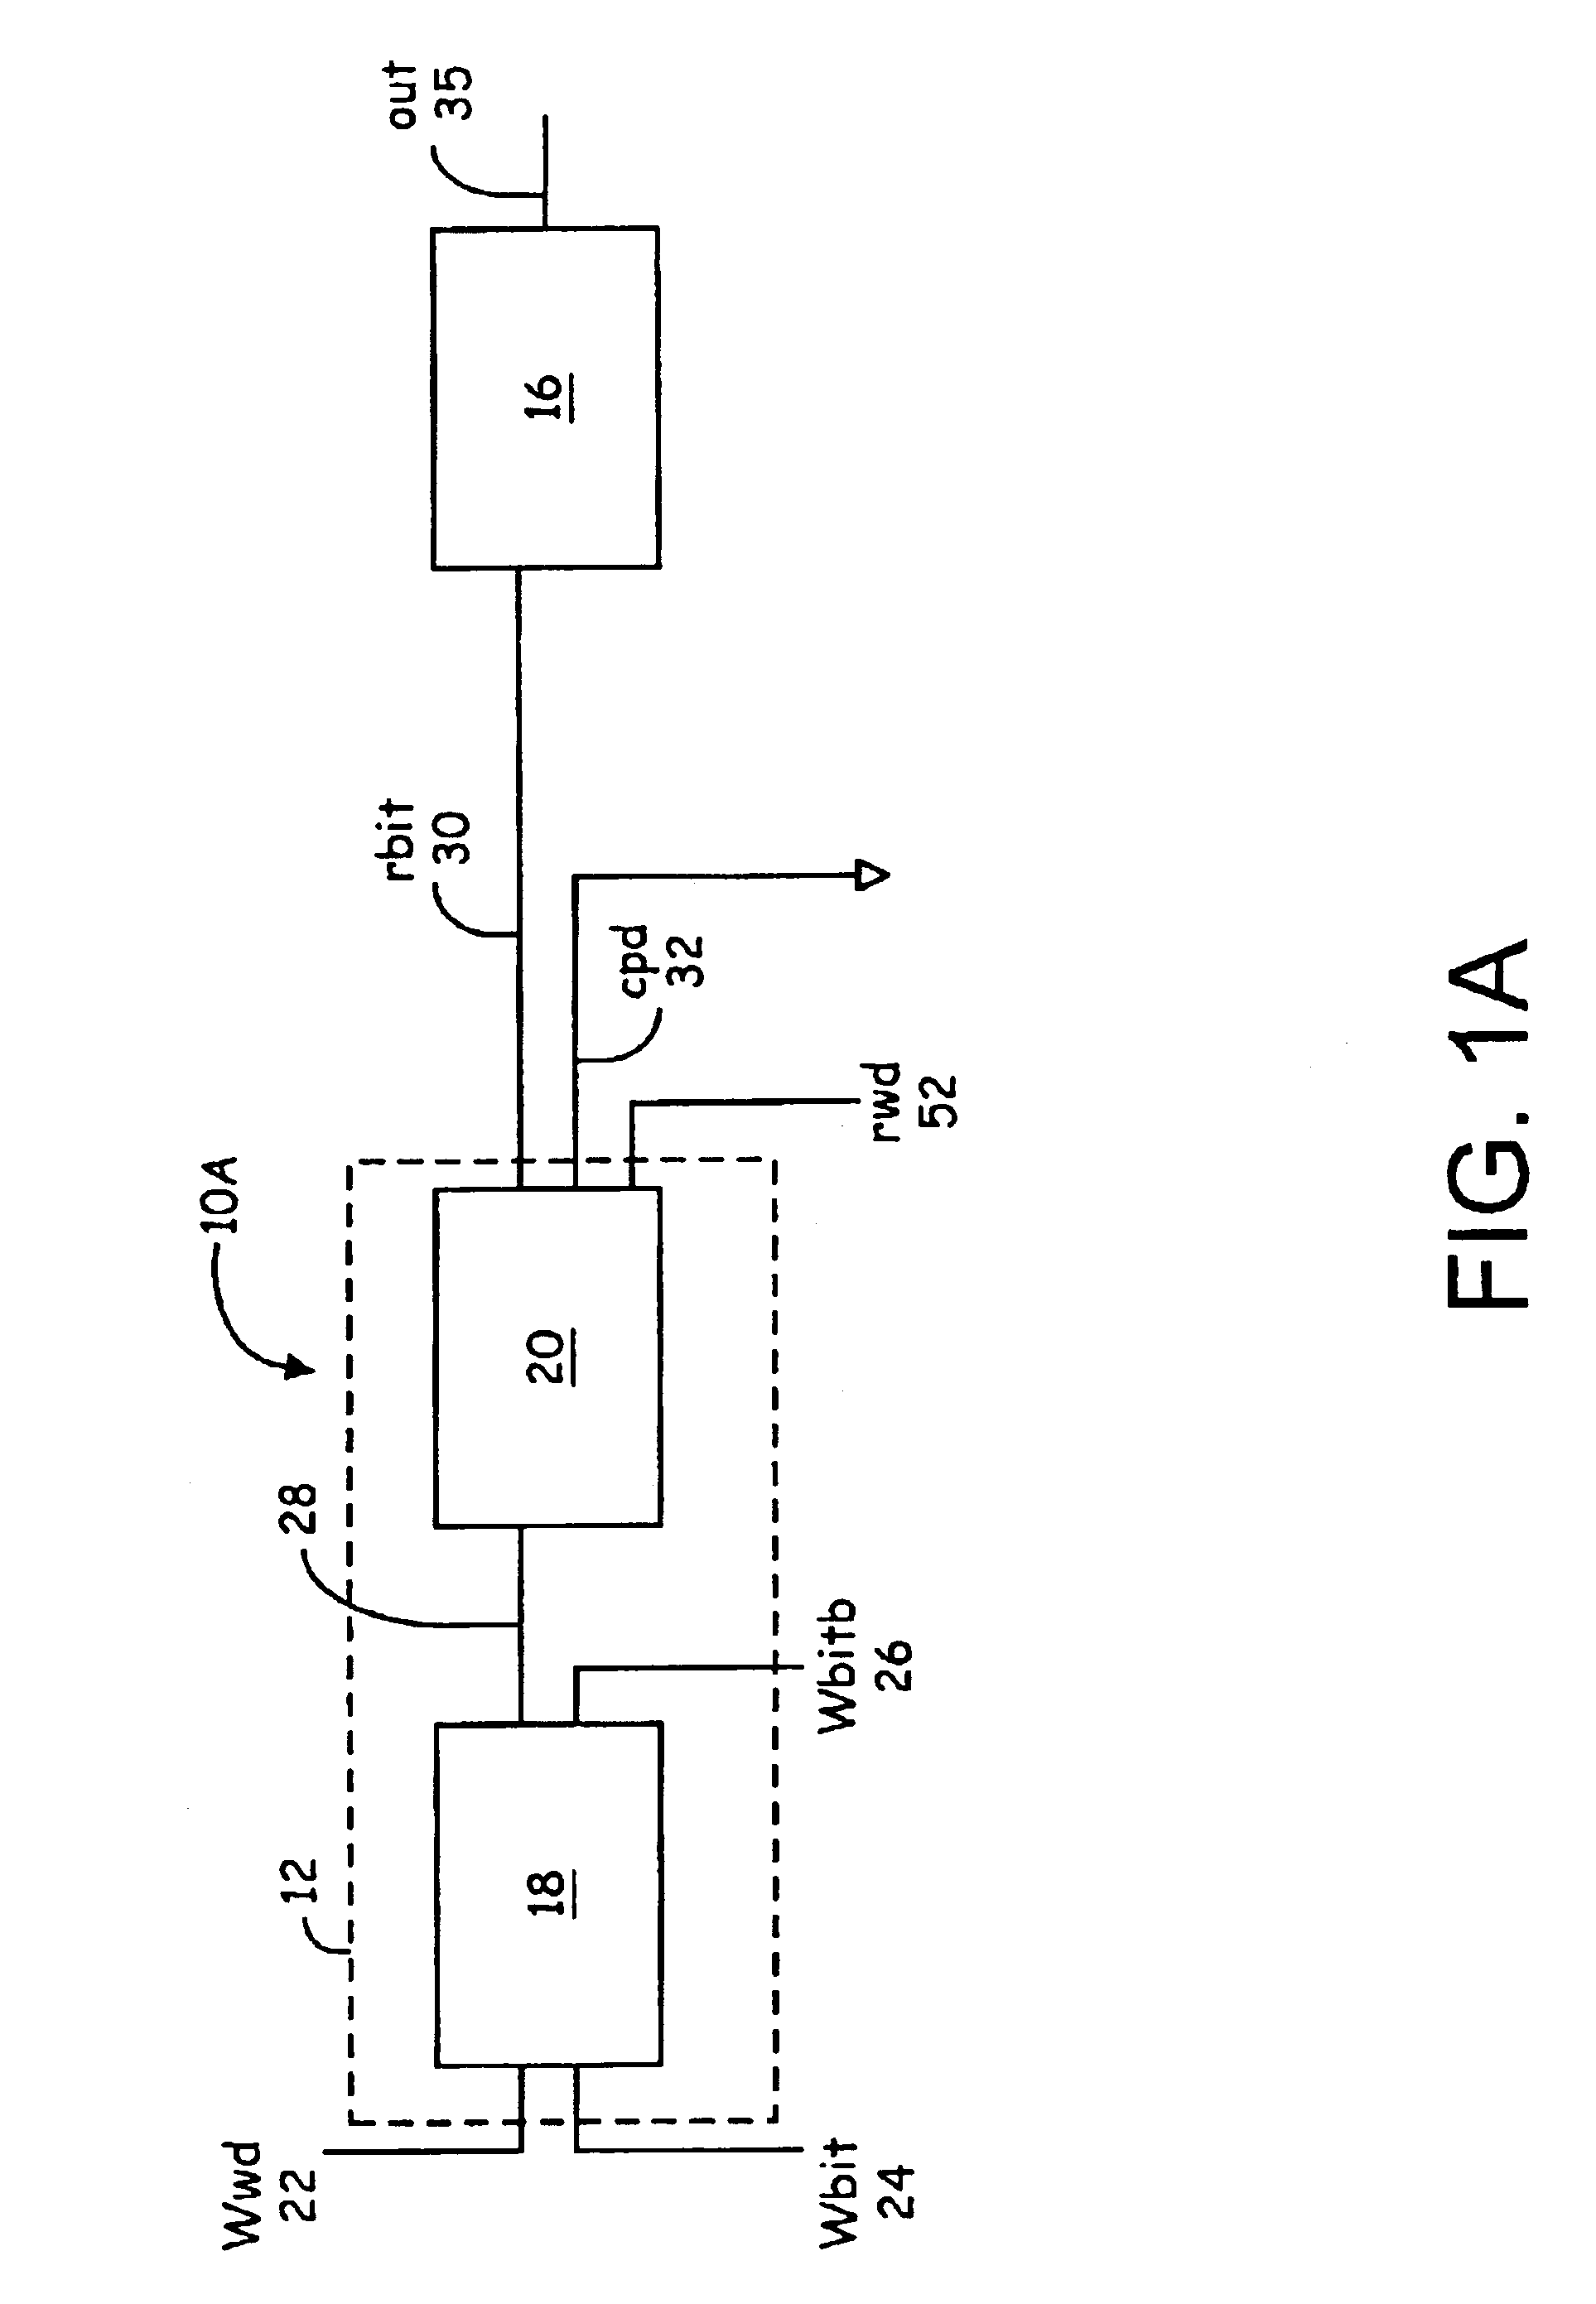 Very small swing high performance CMOS static memory (multi-port register file) with power reducing column multiplexing scheme